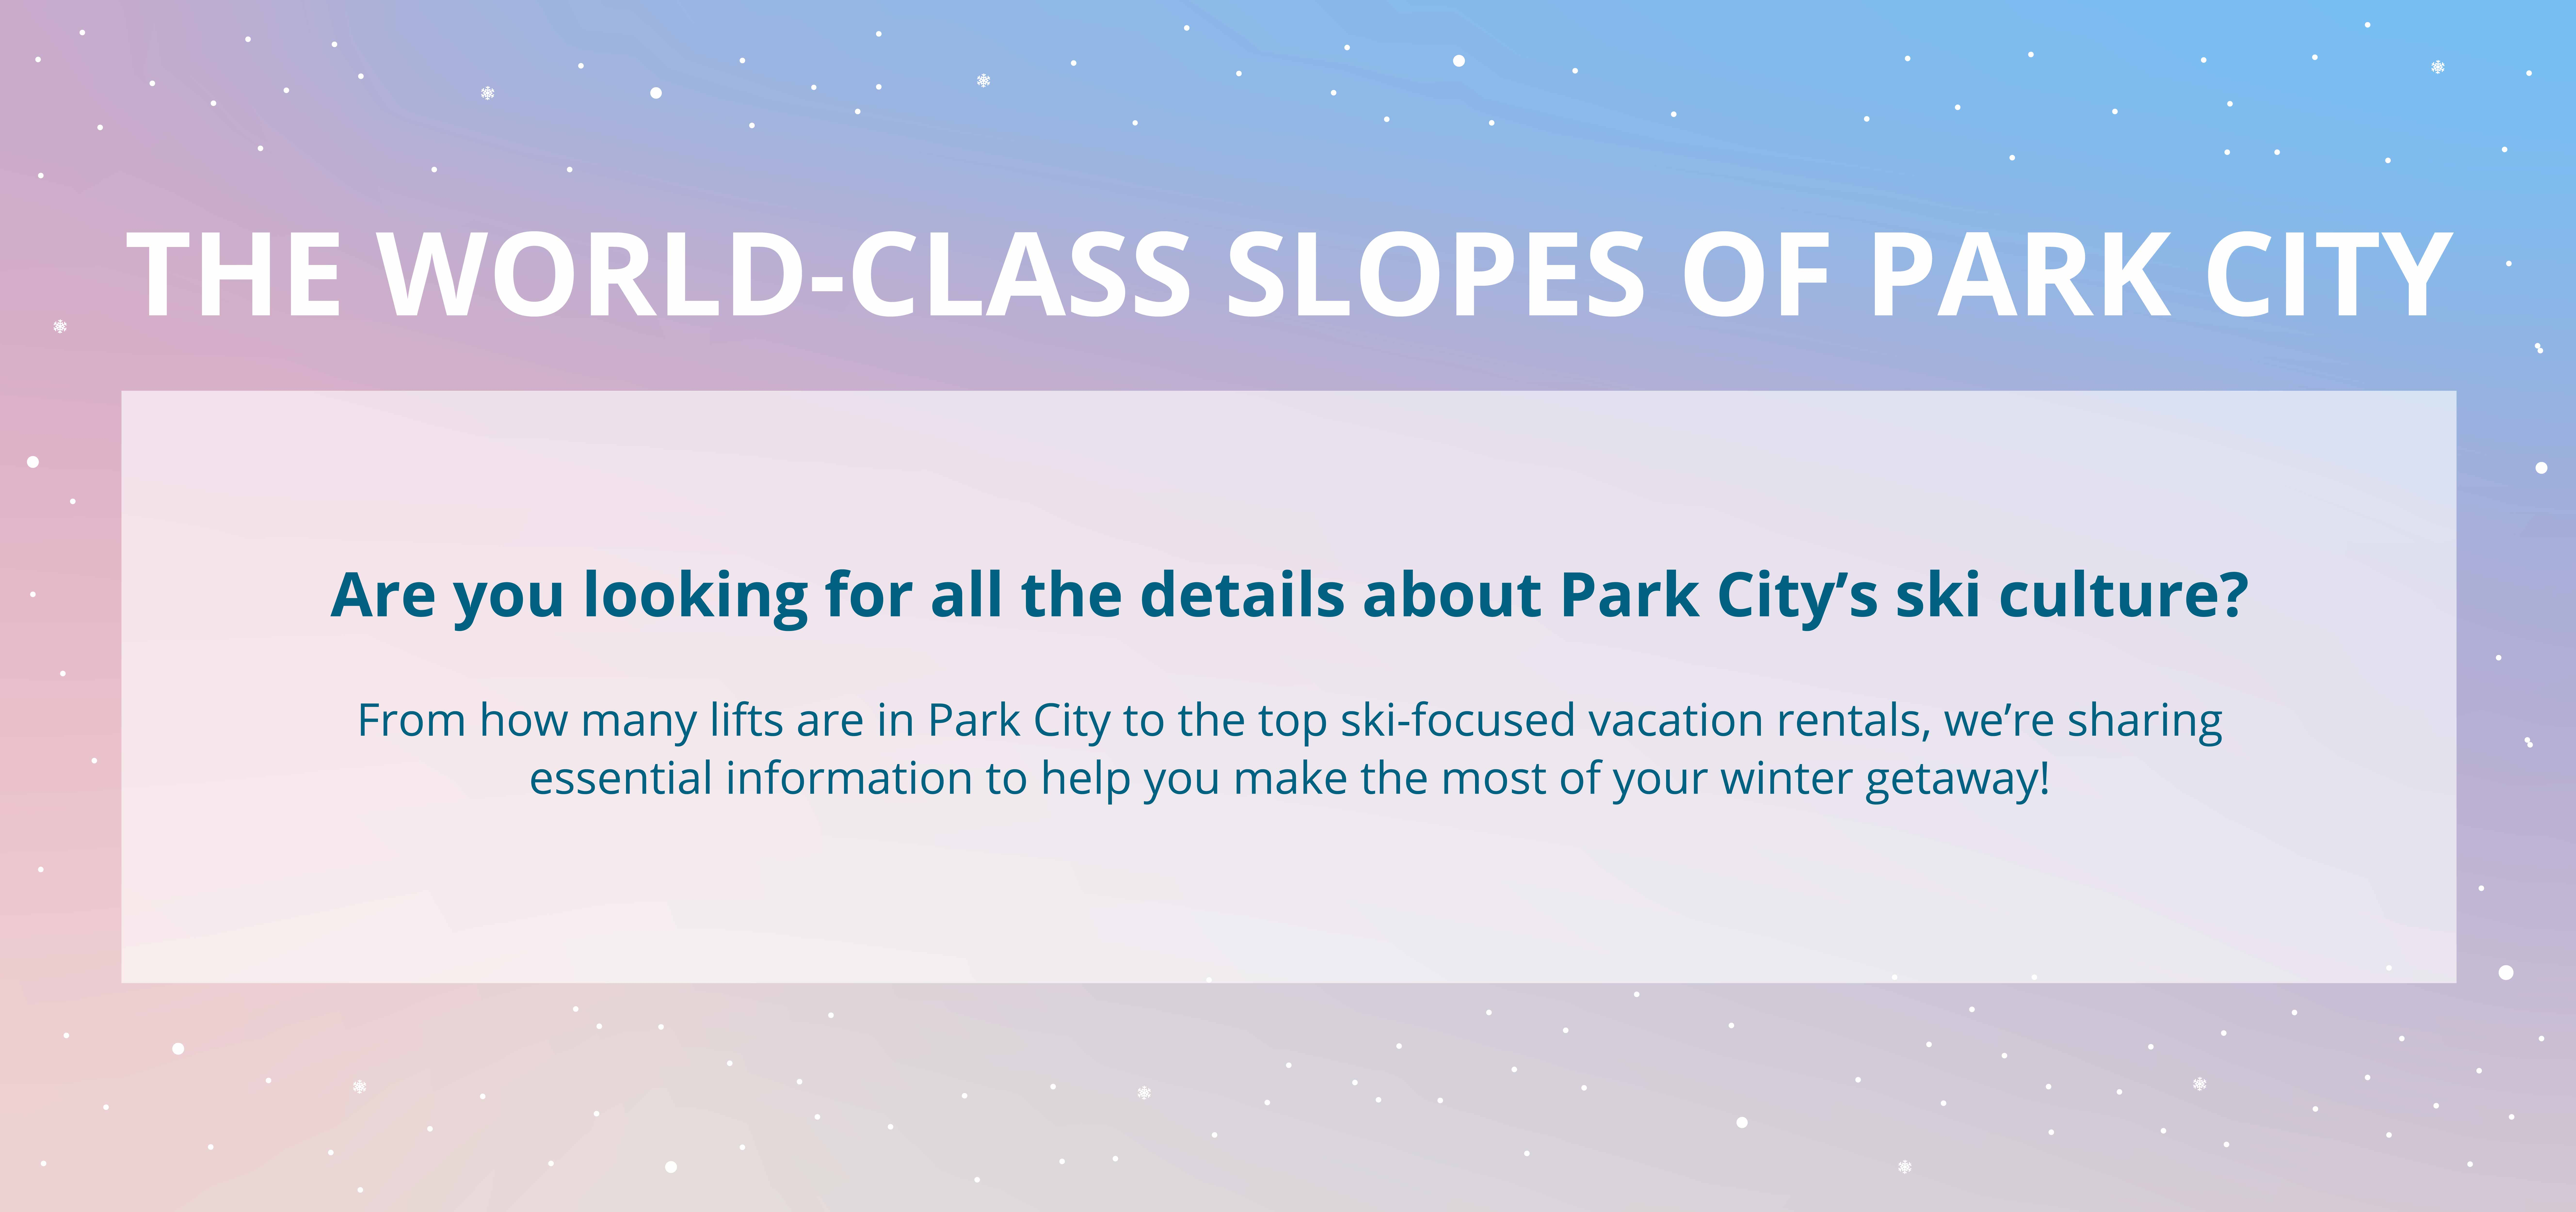 world class slopes of park city infographic teaser image